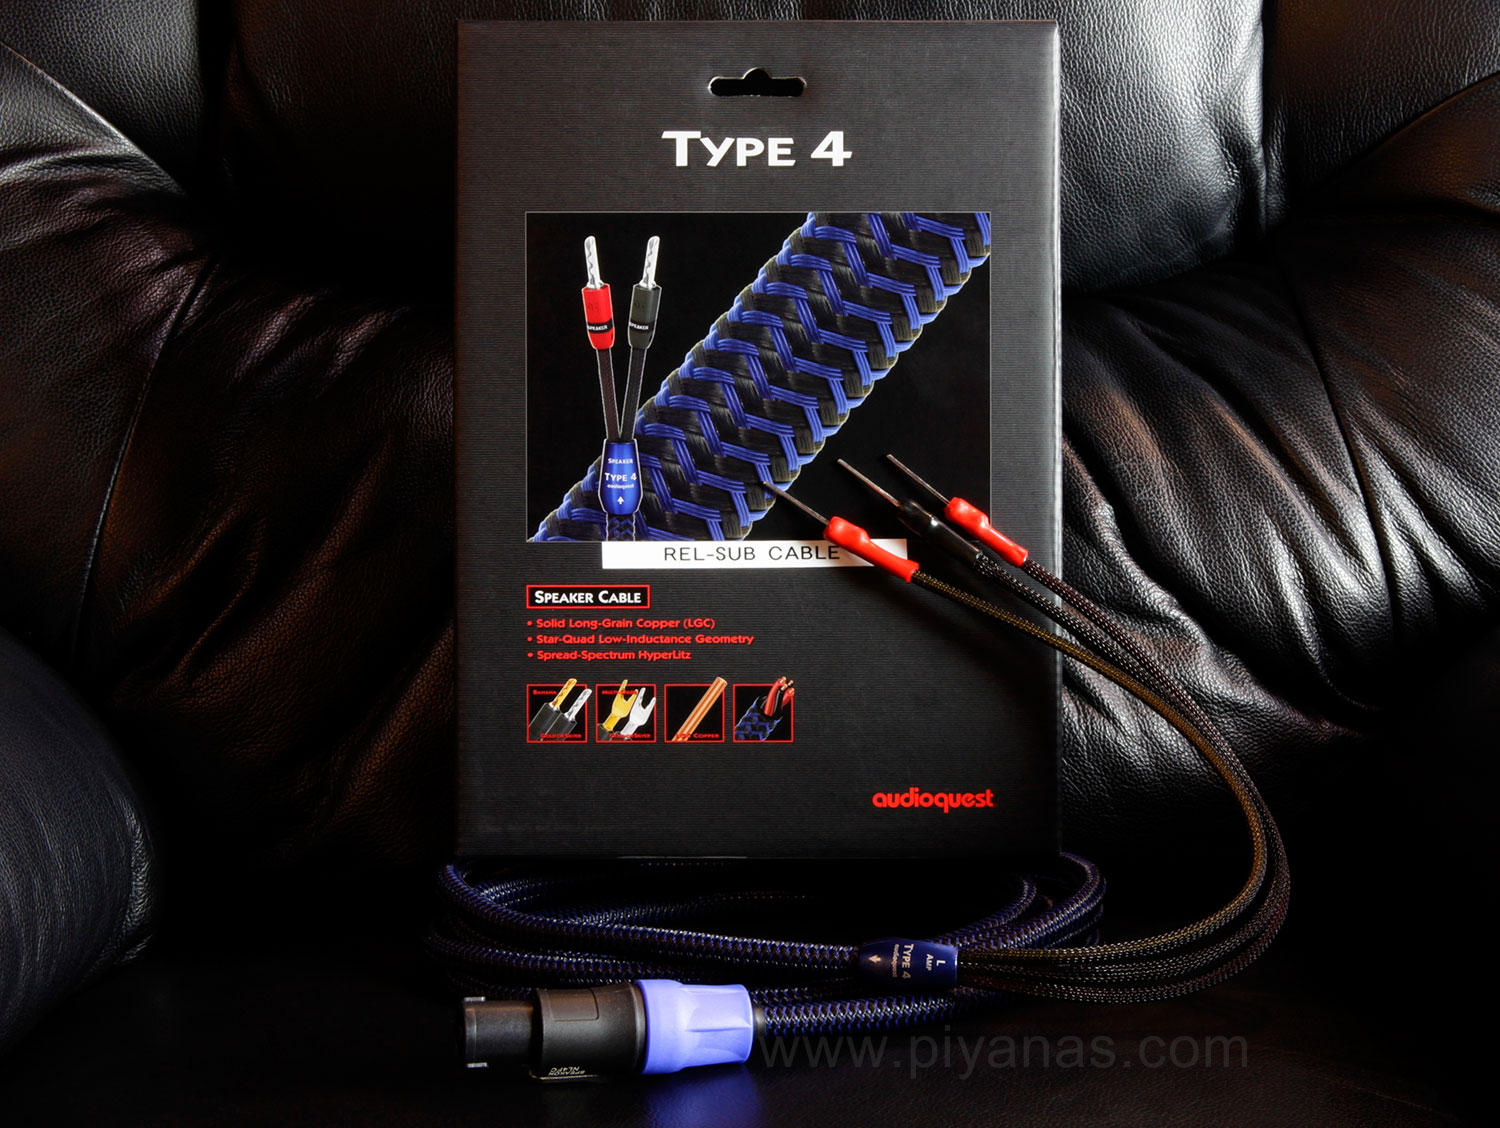 TYPE-4 (REL SUB CABLE) (3.0M)